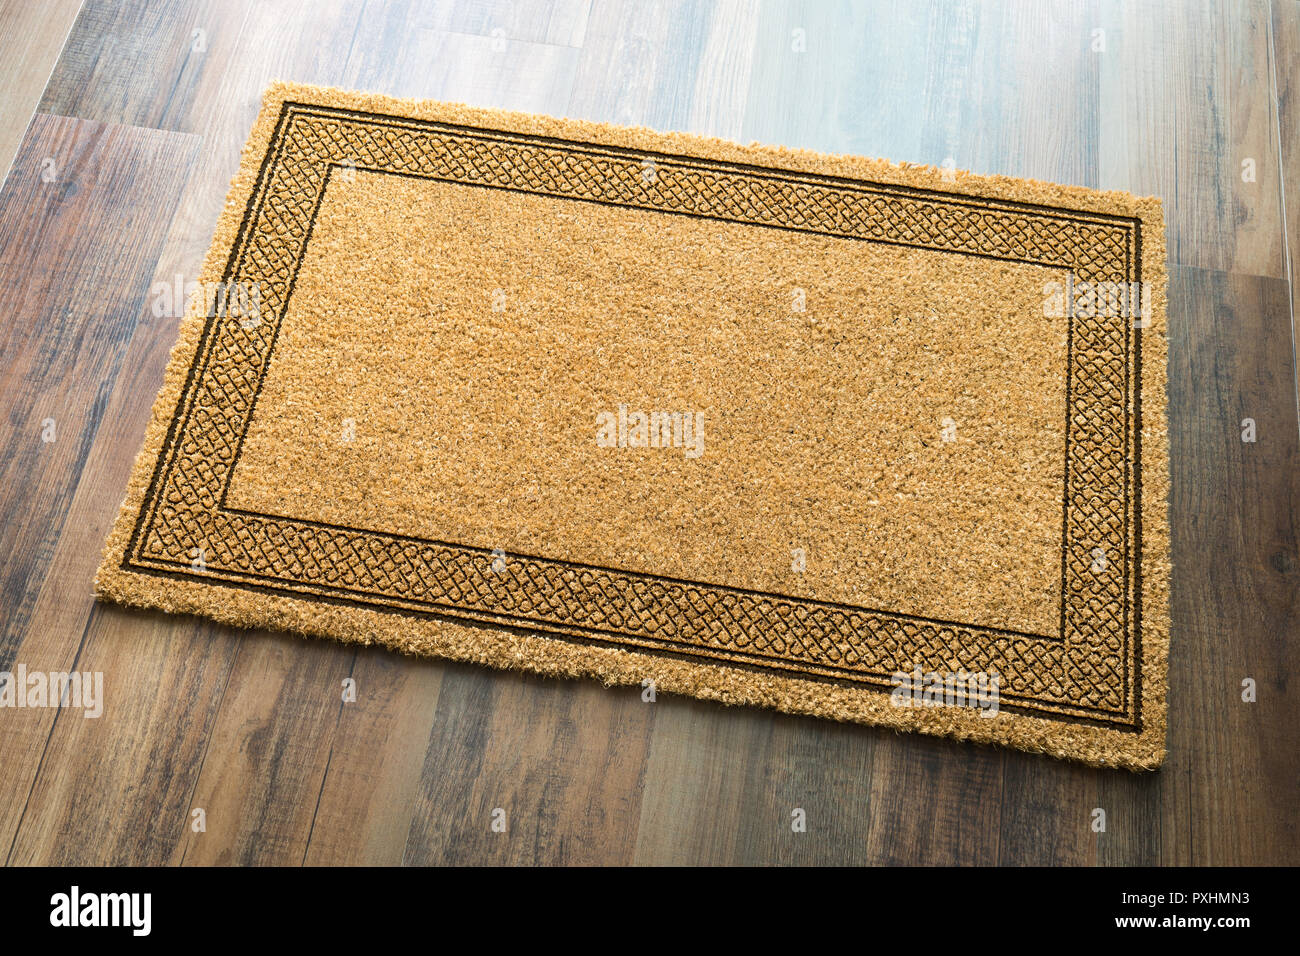 Blank Welcome Mat On Wood Floor Background Ready For Your Own Text. Stock Photo